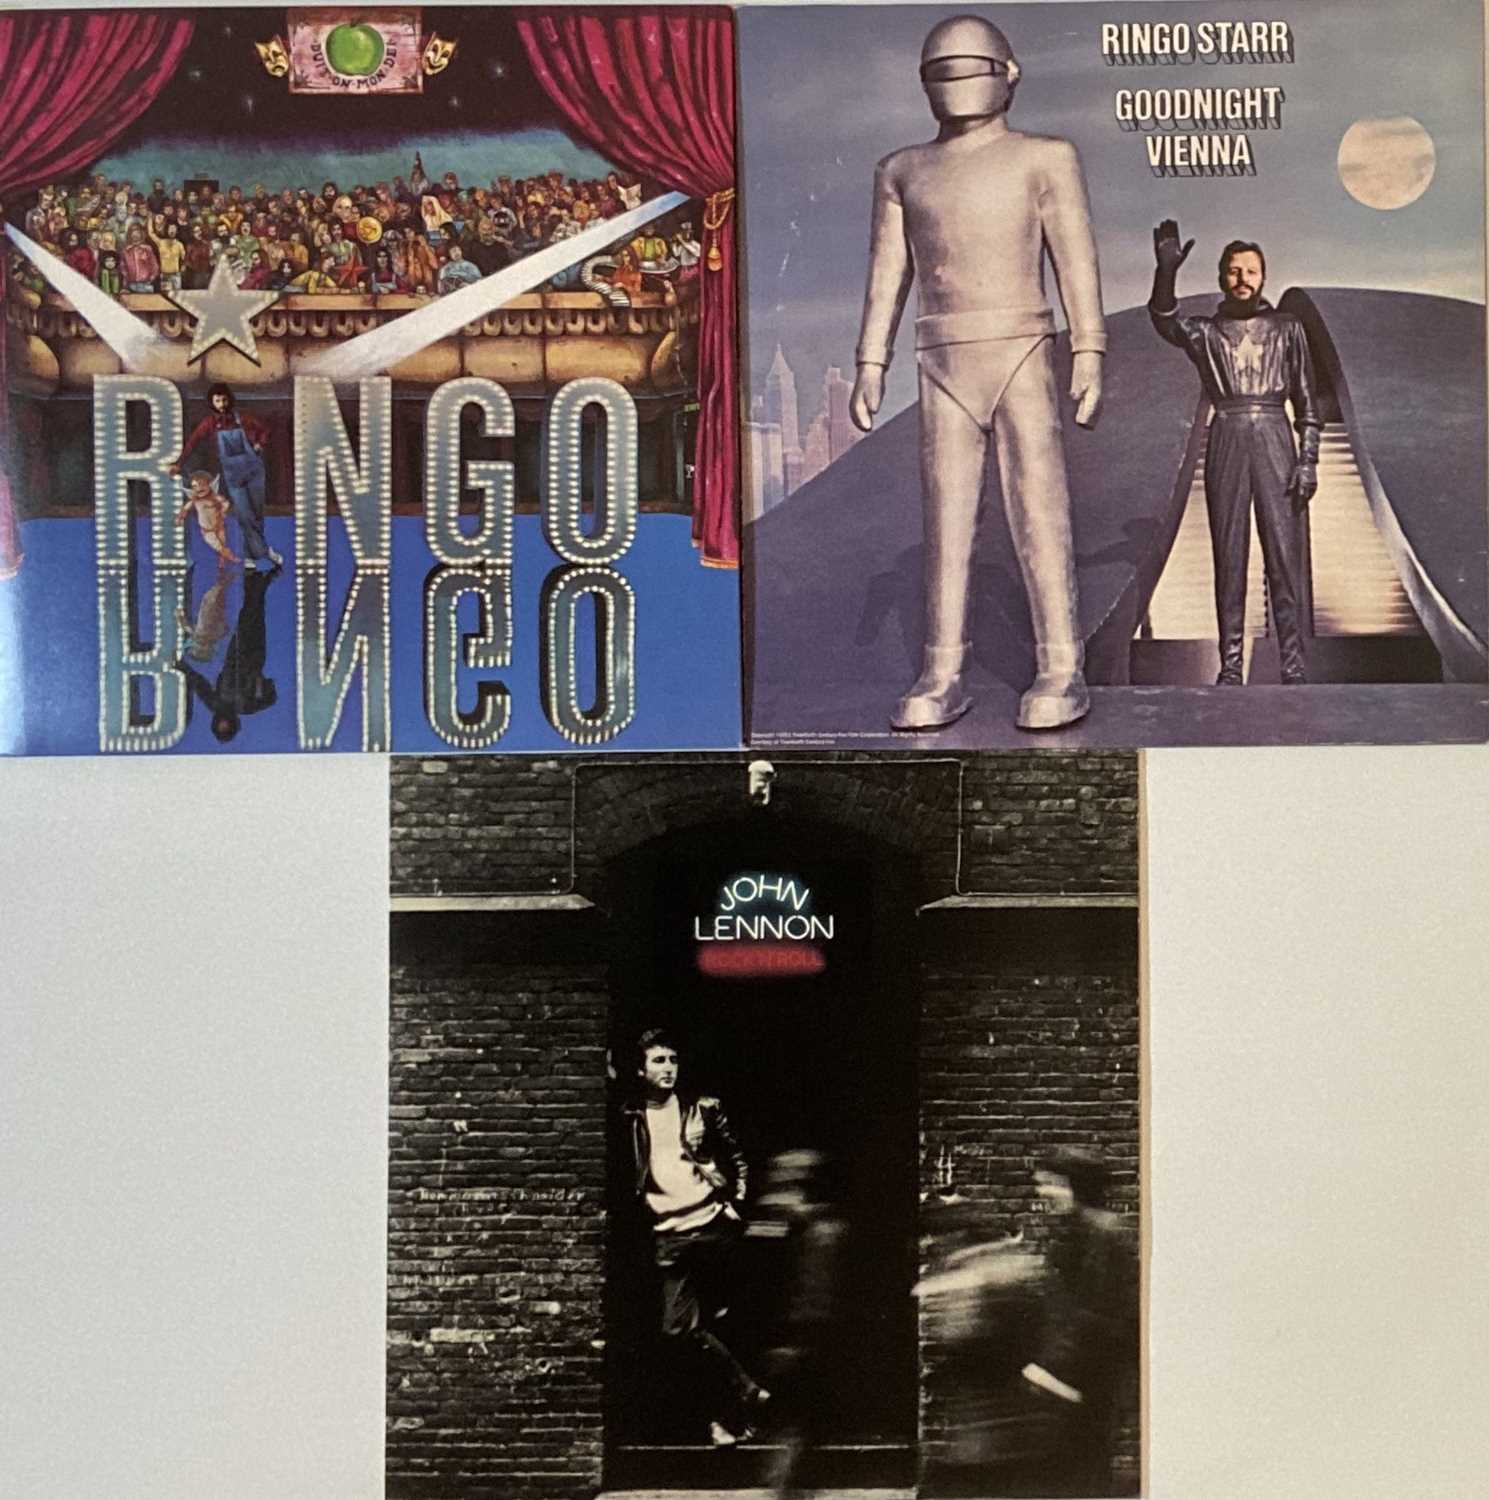 SOLO BEATLES - LPs - Image 2 of 2